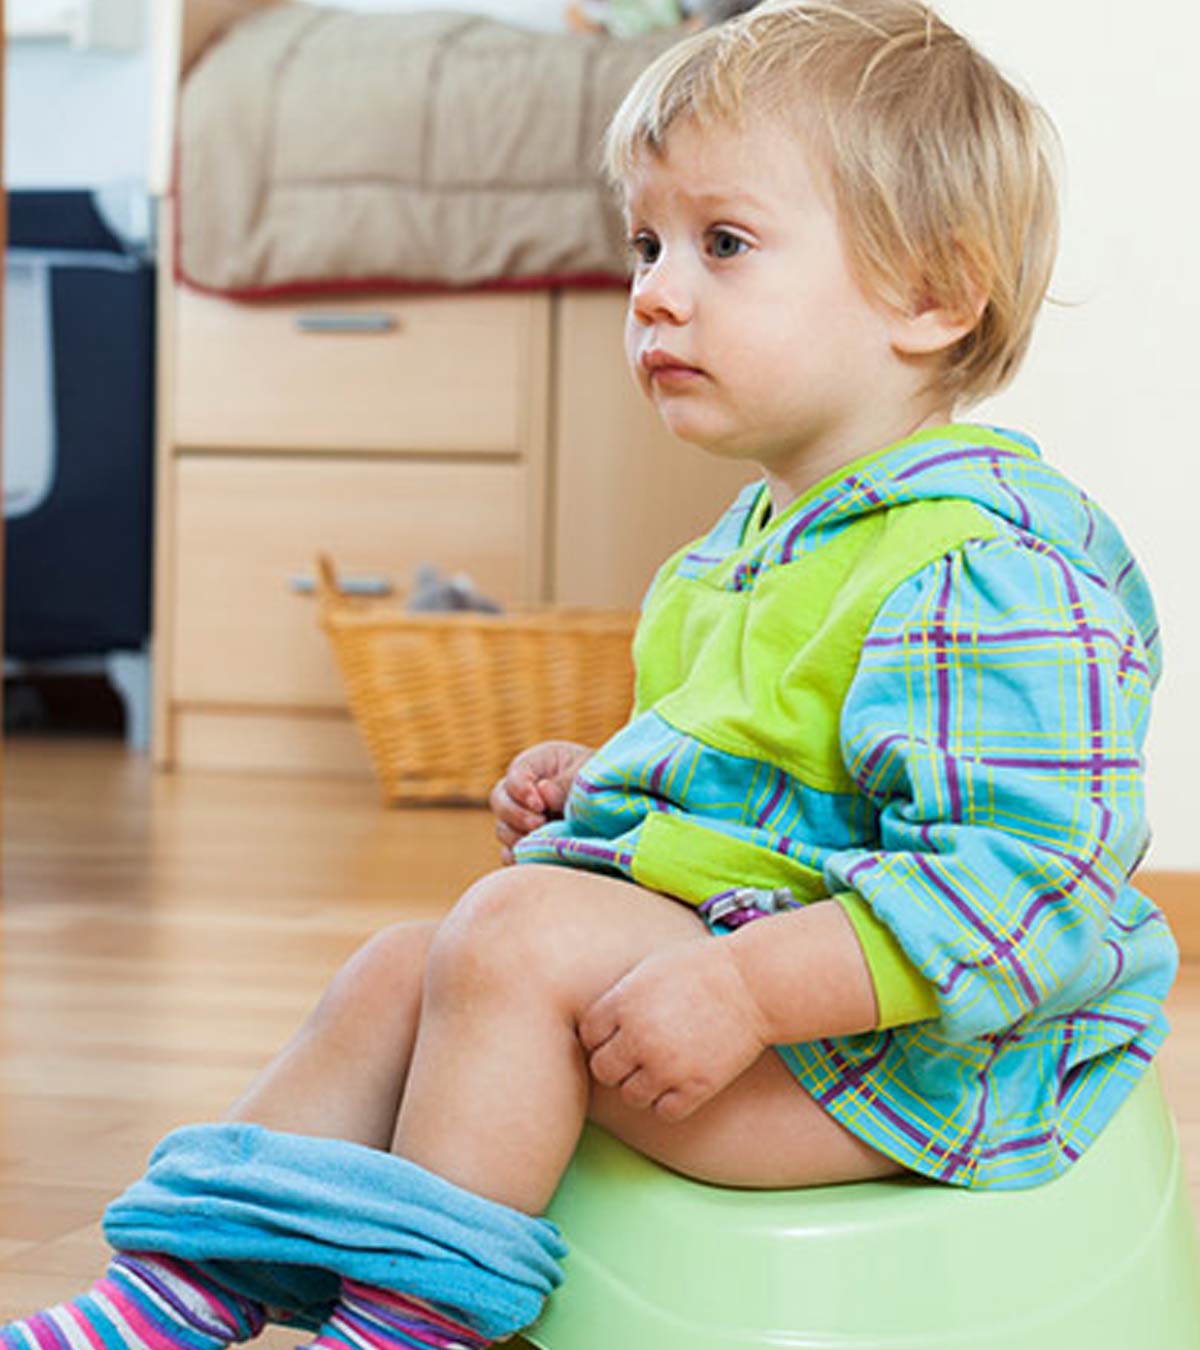 Diarrhea In Toddlers: Causes, Symptoms And Treatment